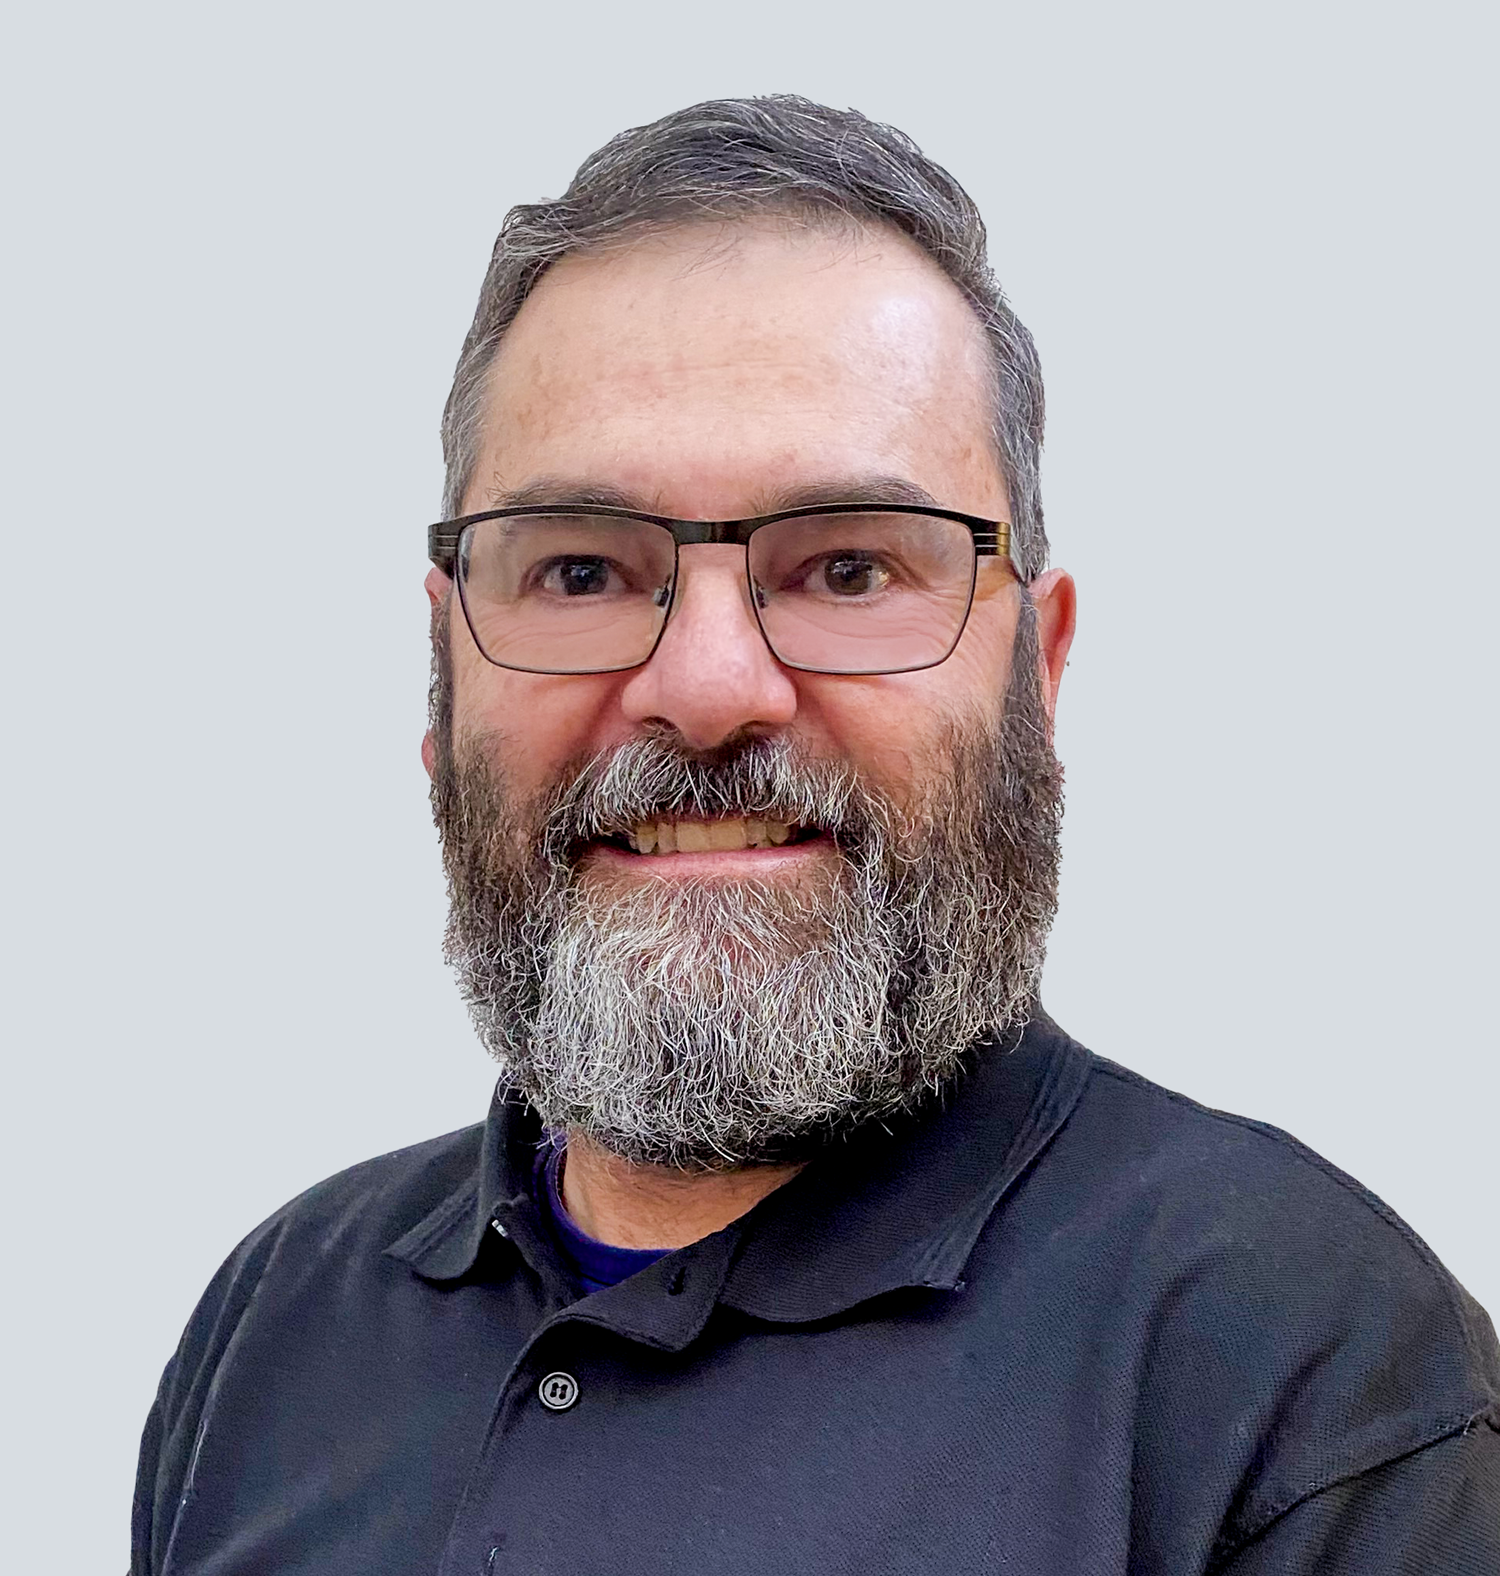 David, a Caucasian man with dark brown and grey hair and a short cropped dark brown and grey beard, wearing black framed glasses and a black polo shirt. He is standing in front of a light grey wall.